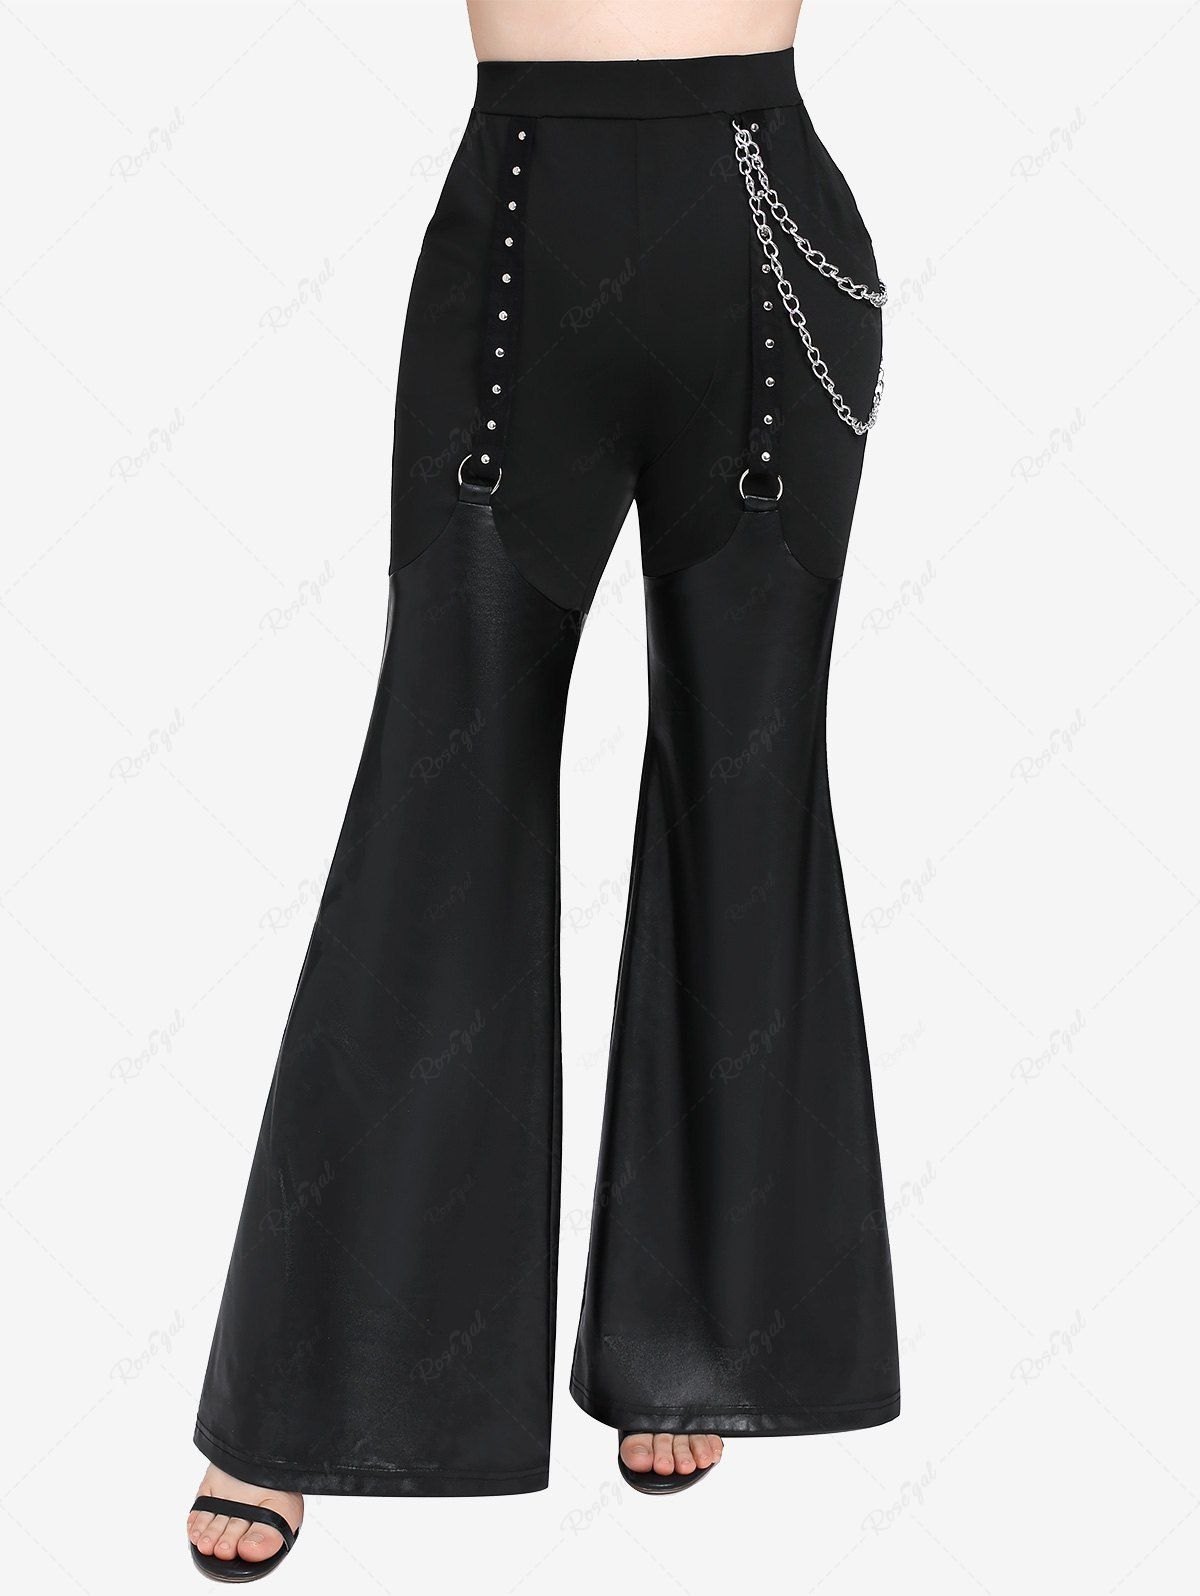 Gothic Chain O-Ring PU Leather Patchwork Grommet Pocket Flare Pants